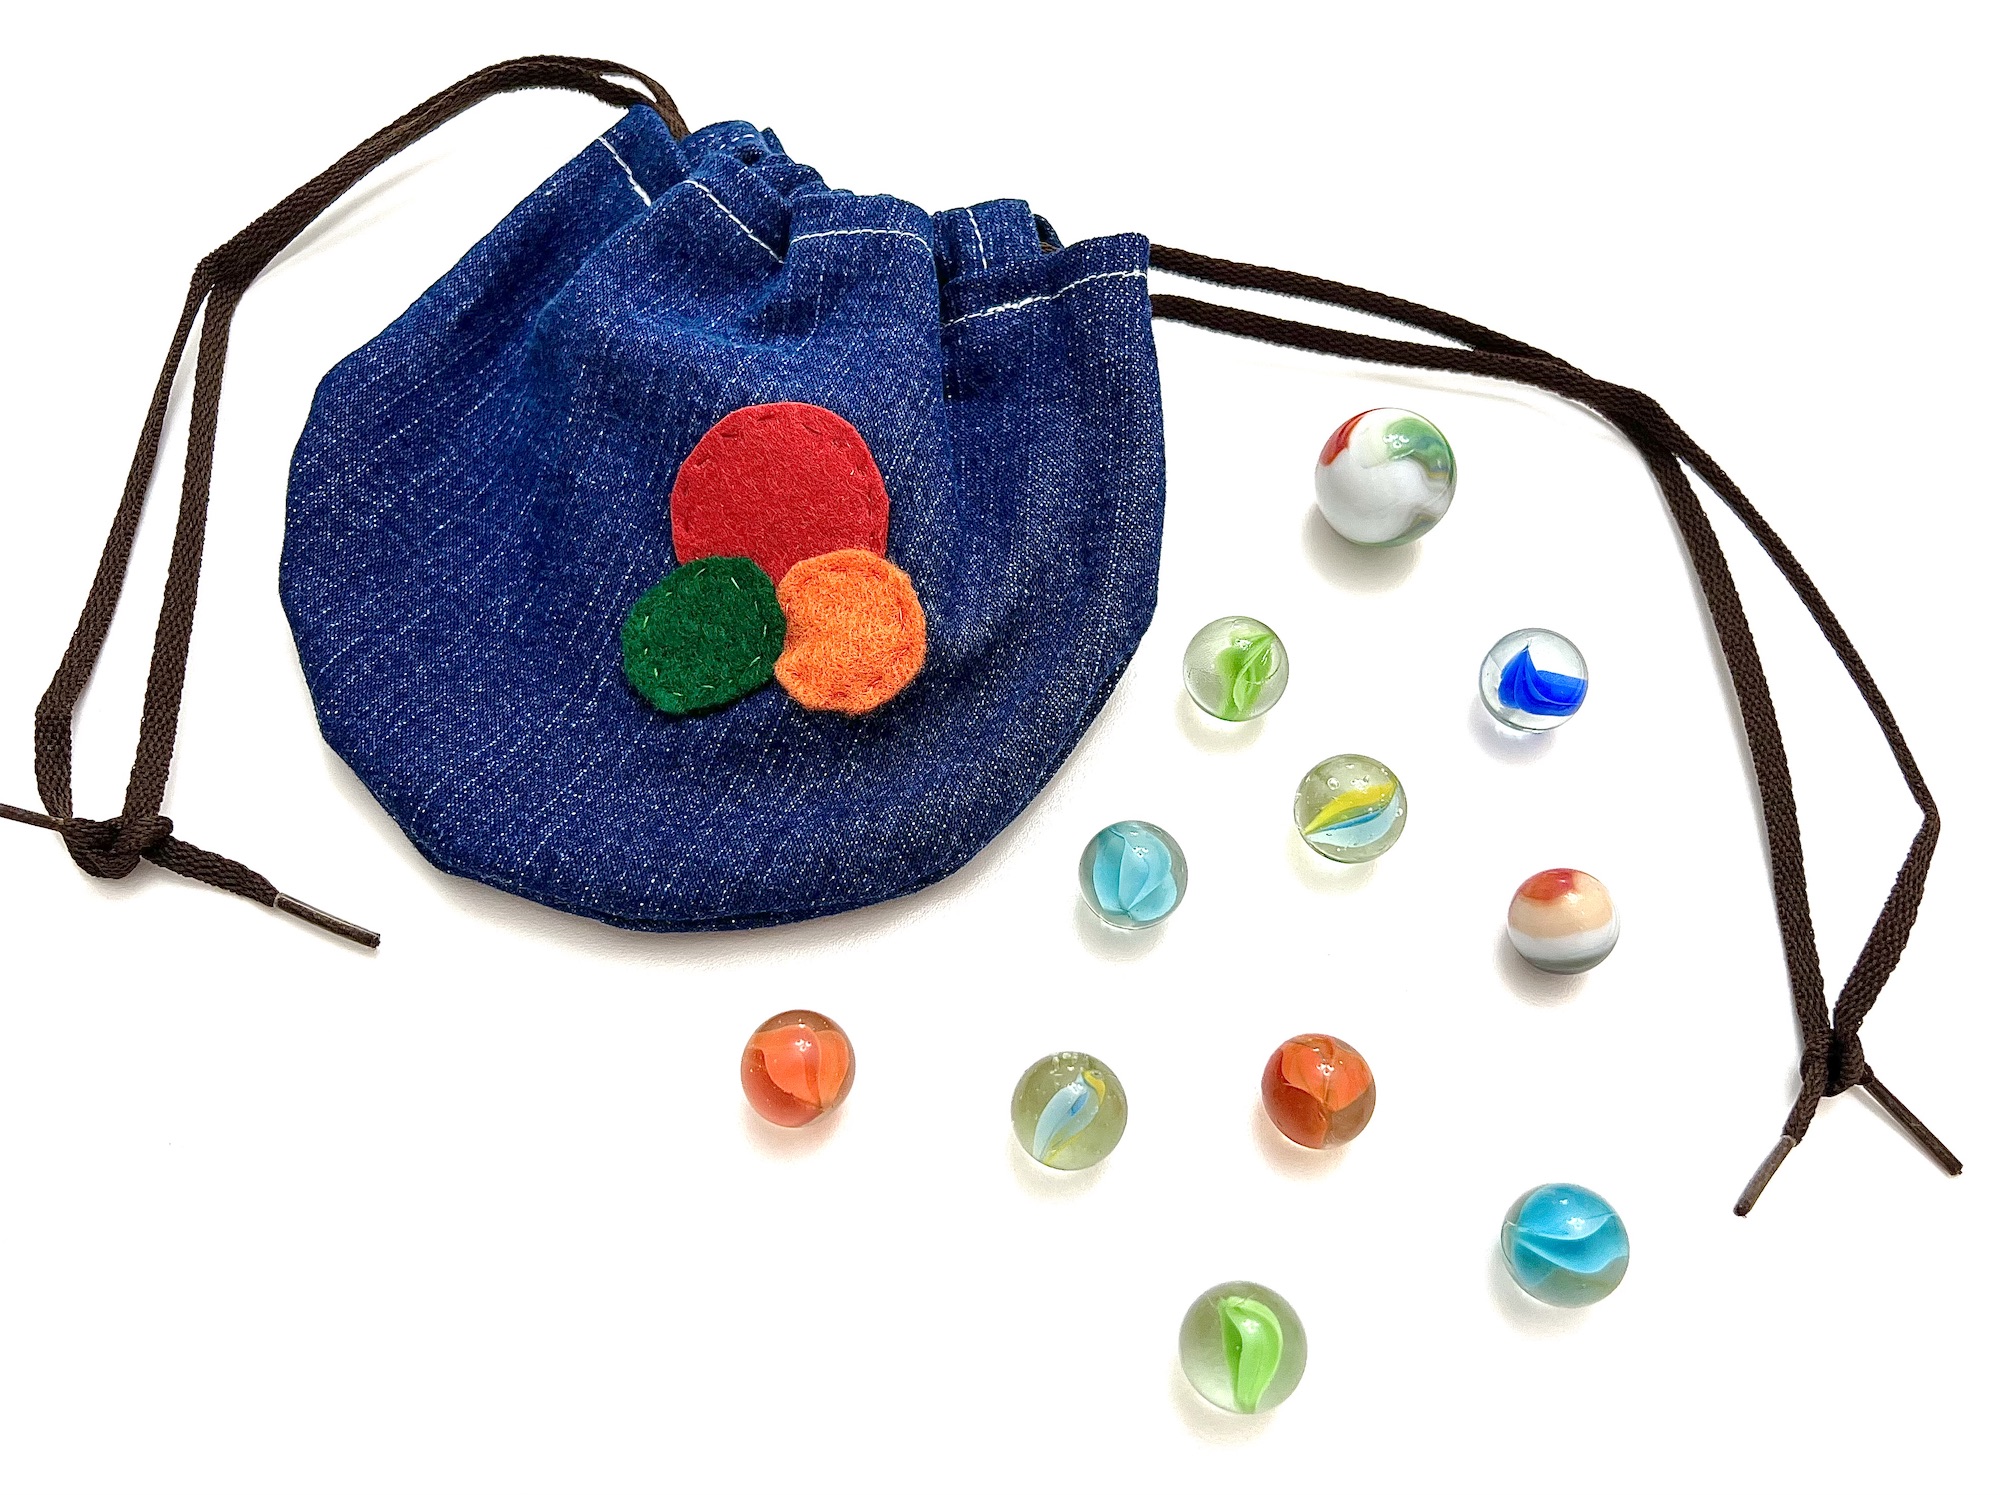 DIY Marble Bag (Free Pattern and Game Instructions)